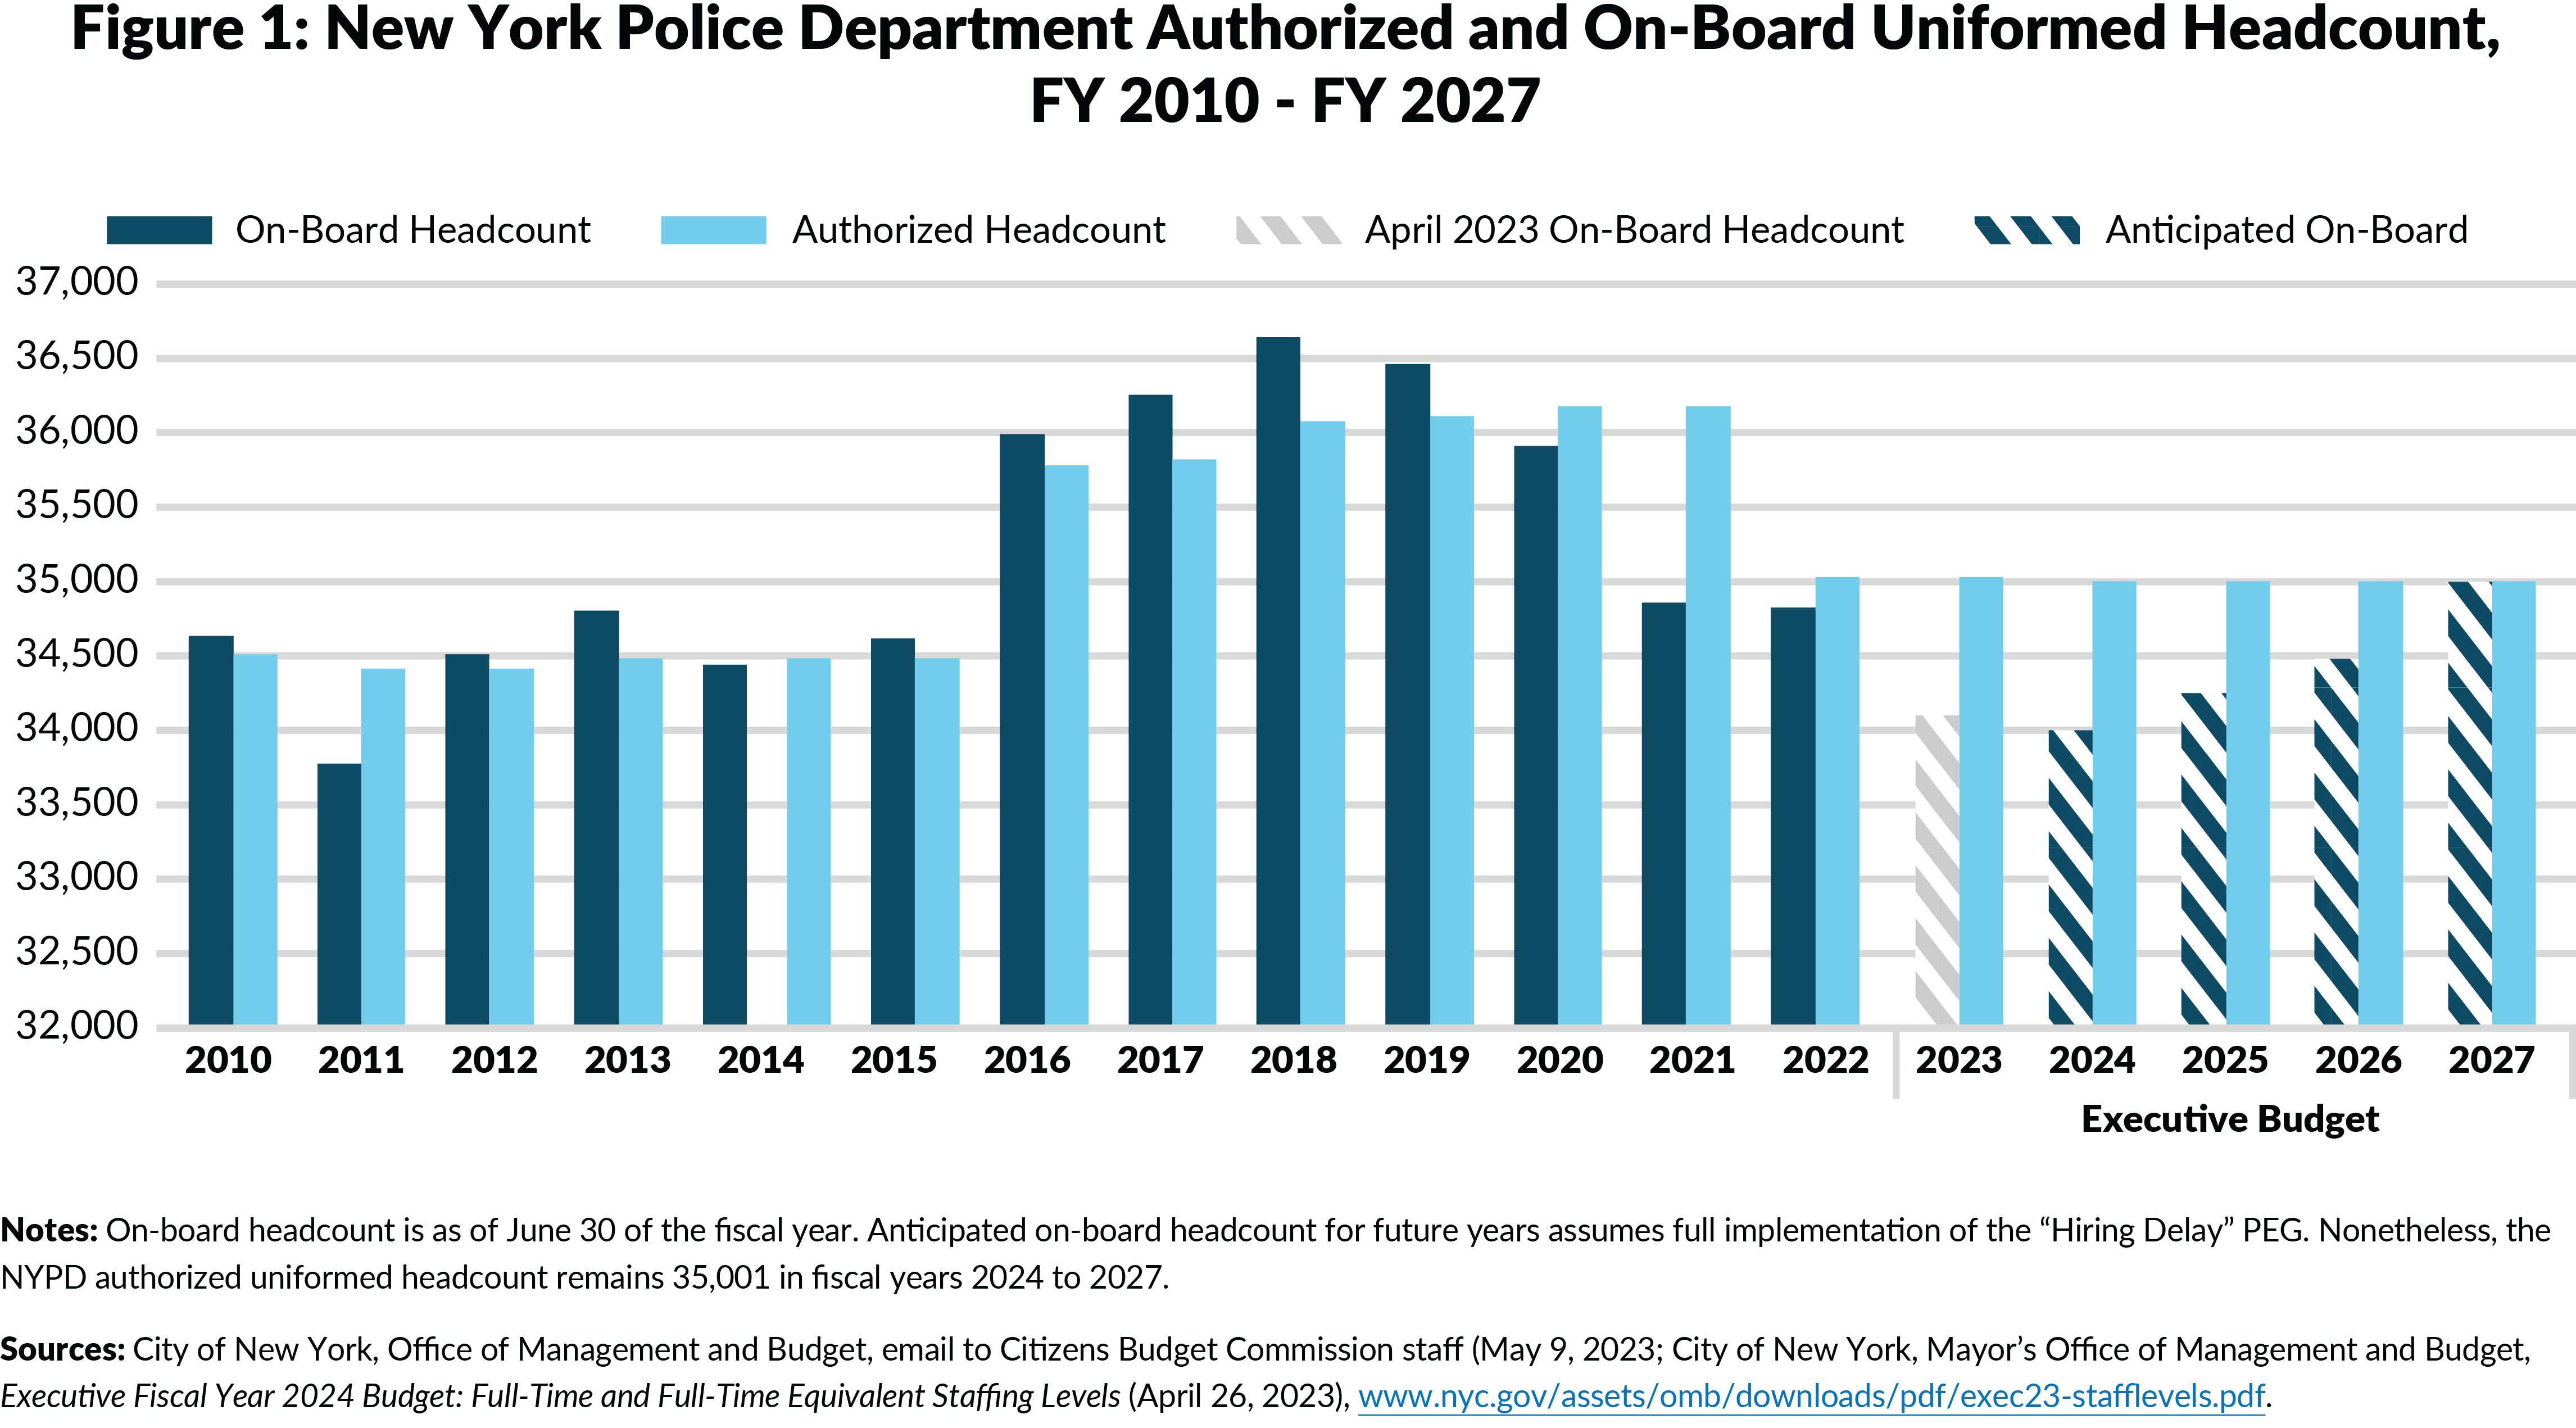 Figure 1: New York Police Department Authorized and On-Board Uniformed Headcount,FY 2010 - FY 2027